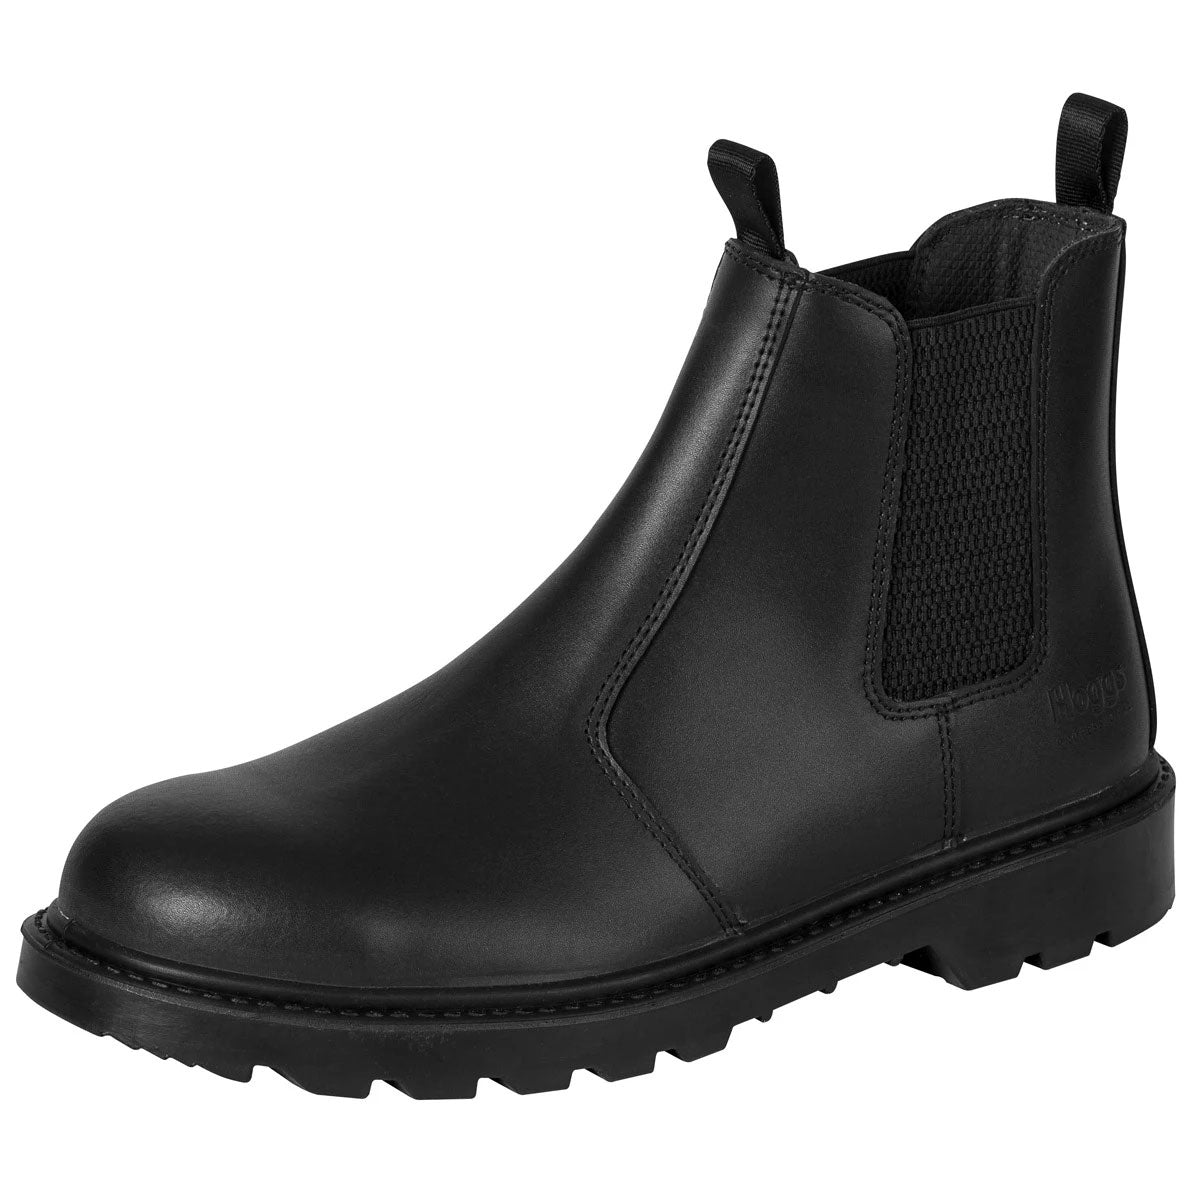 Black Hoggs of Fife Classic Safety Dealer Boot 